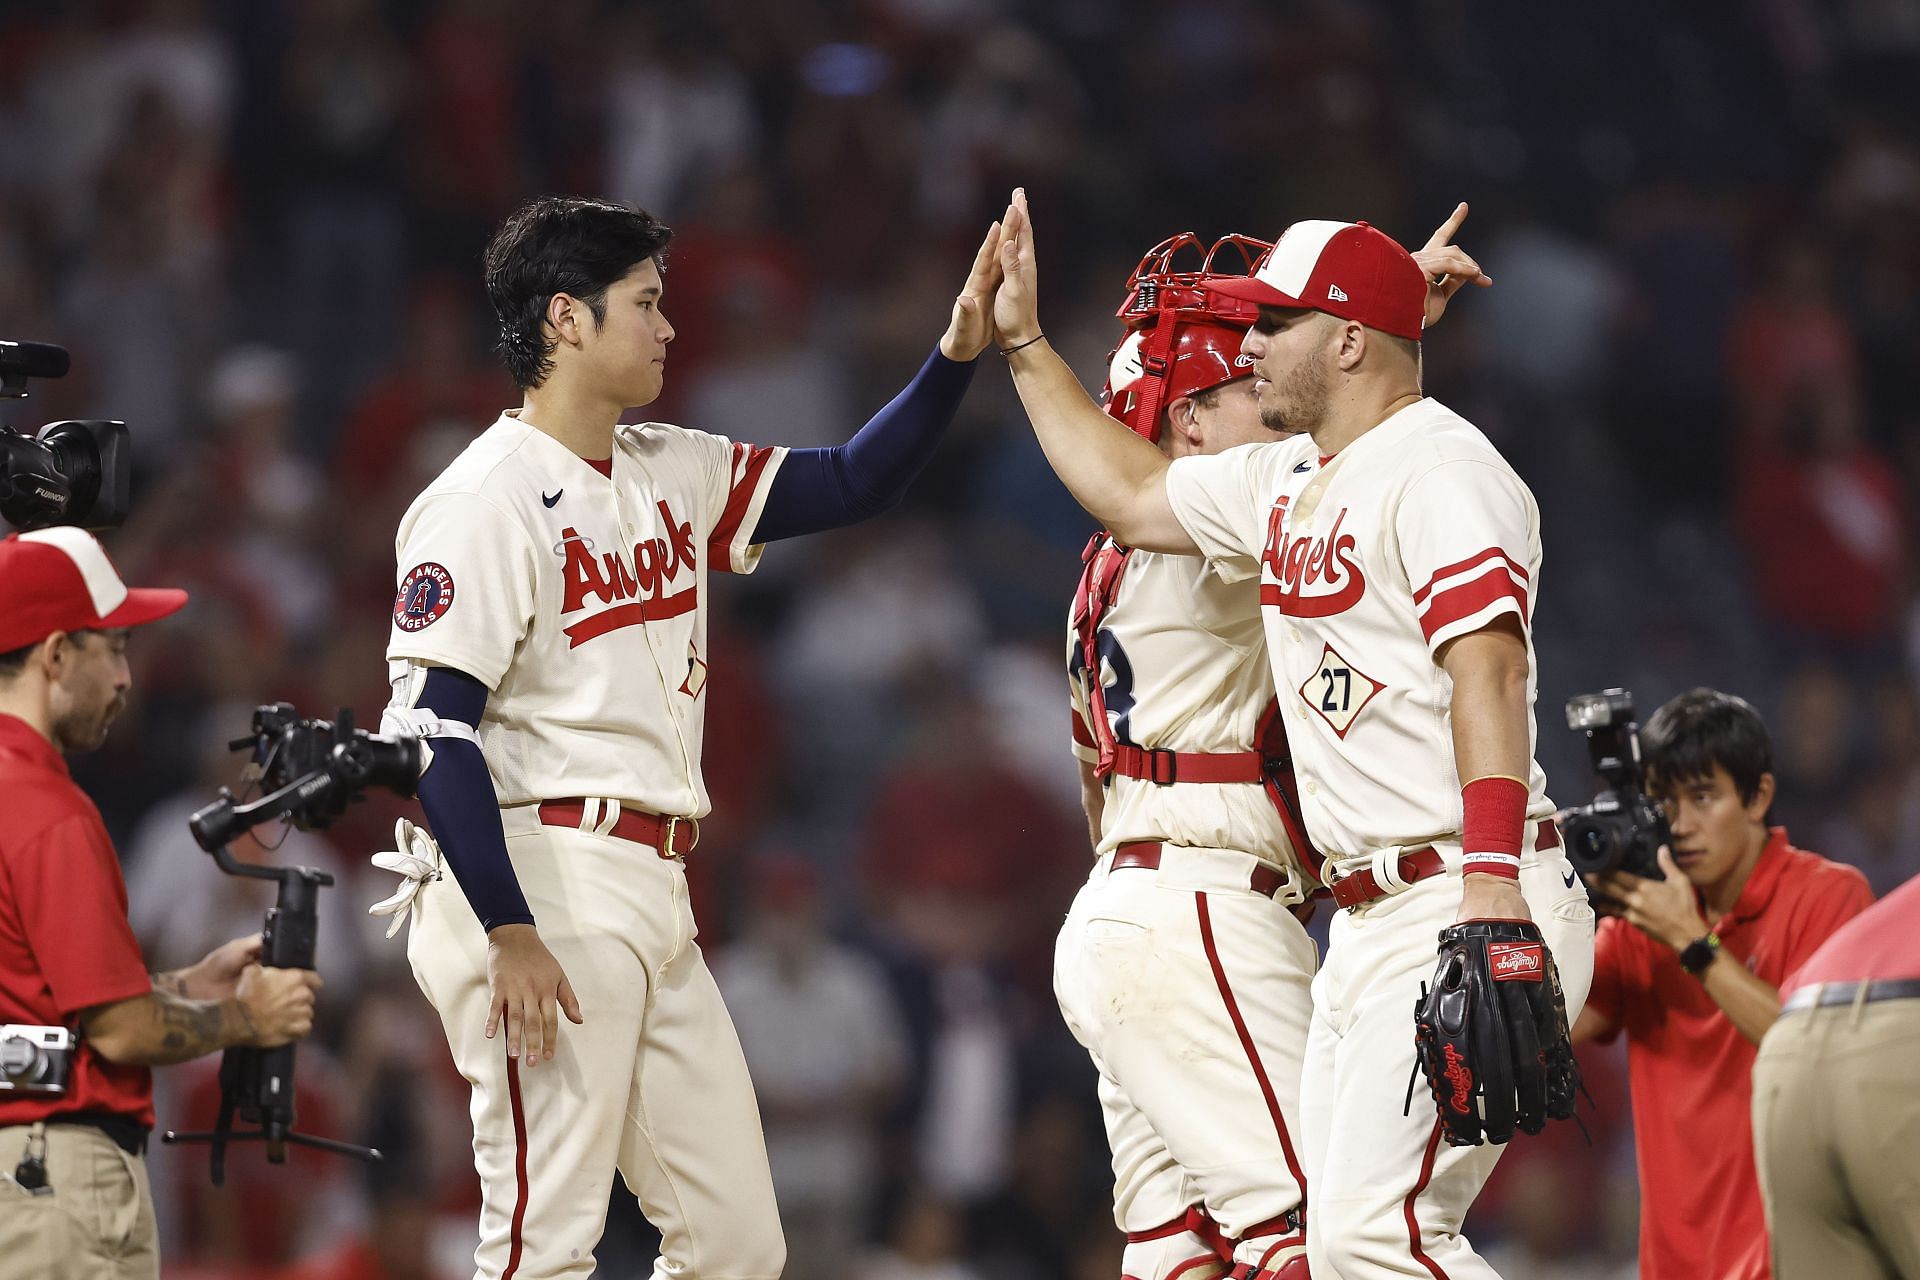 Shohei Ohtani celebrates with teammate Mike Trout after defeating the Oakland Athletics.